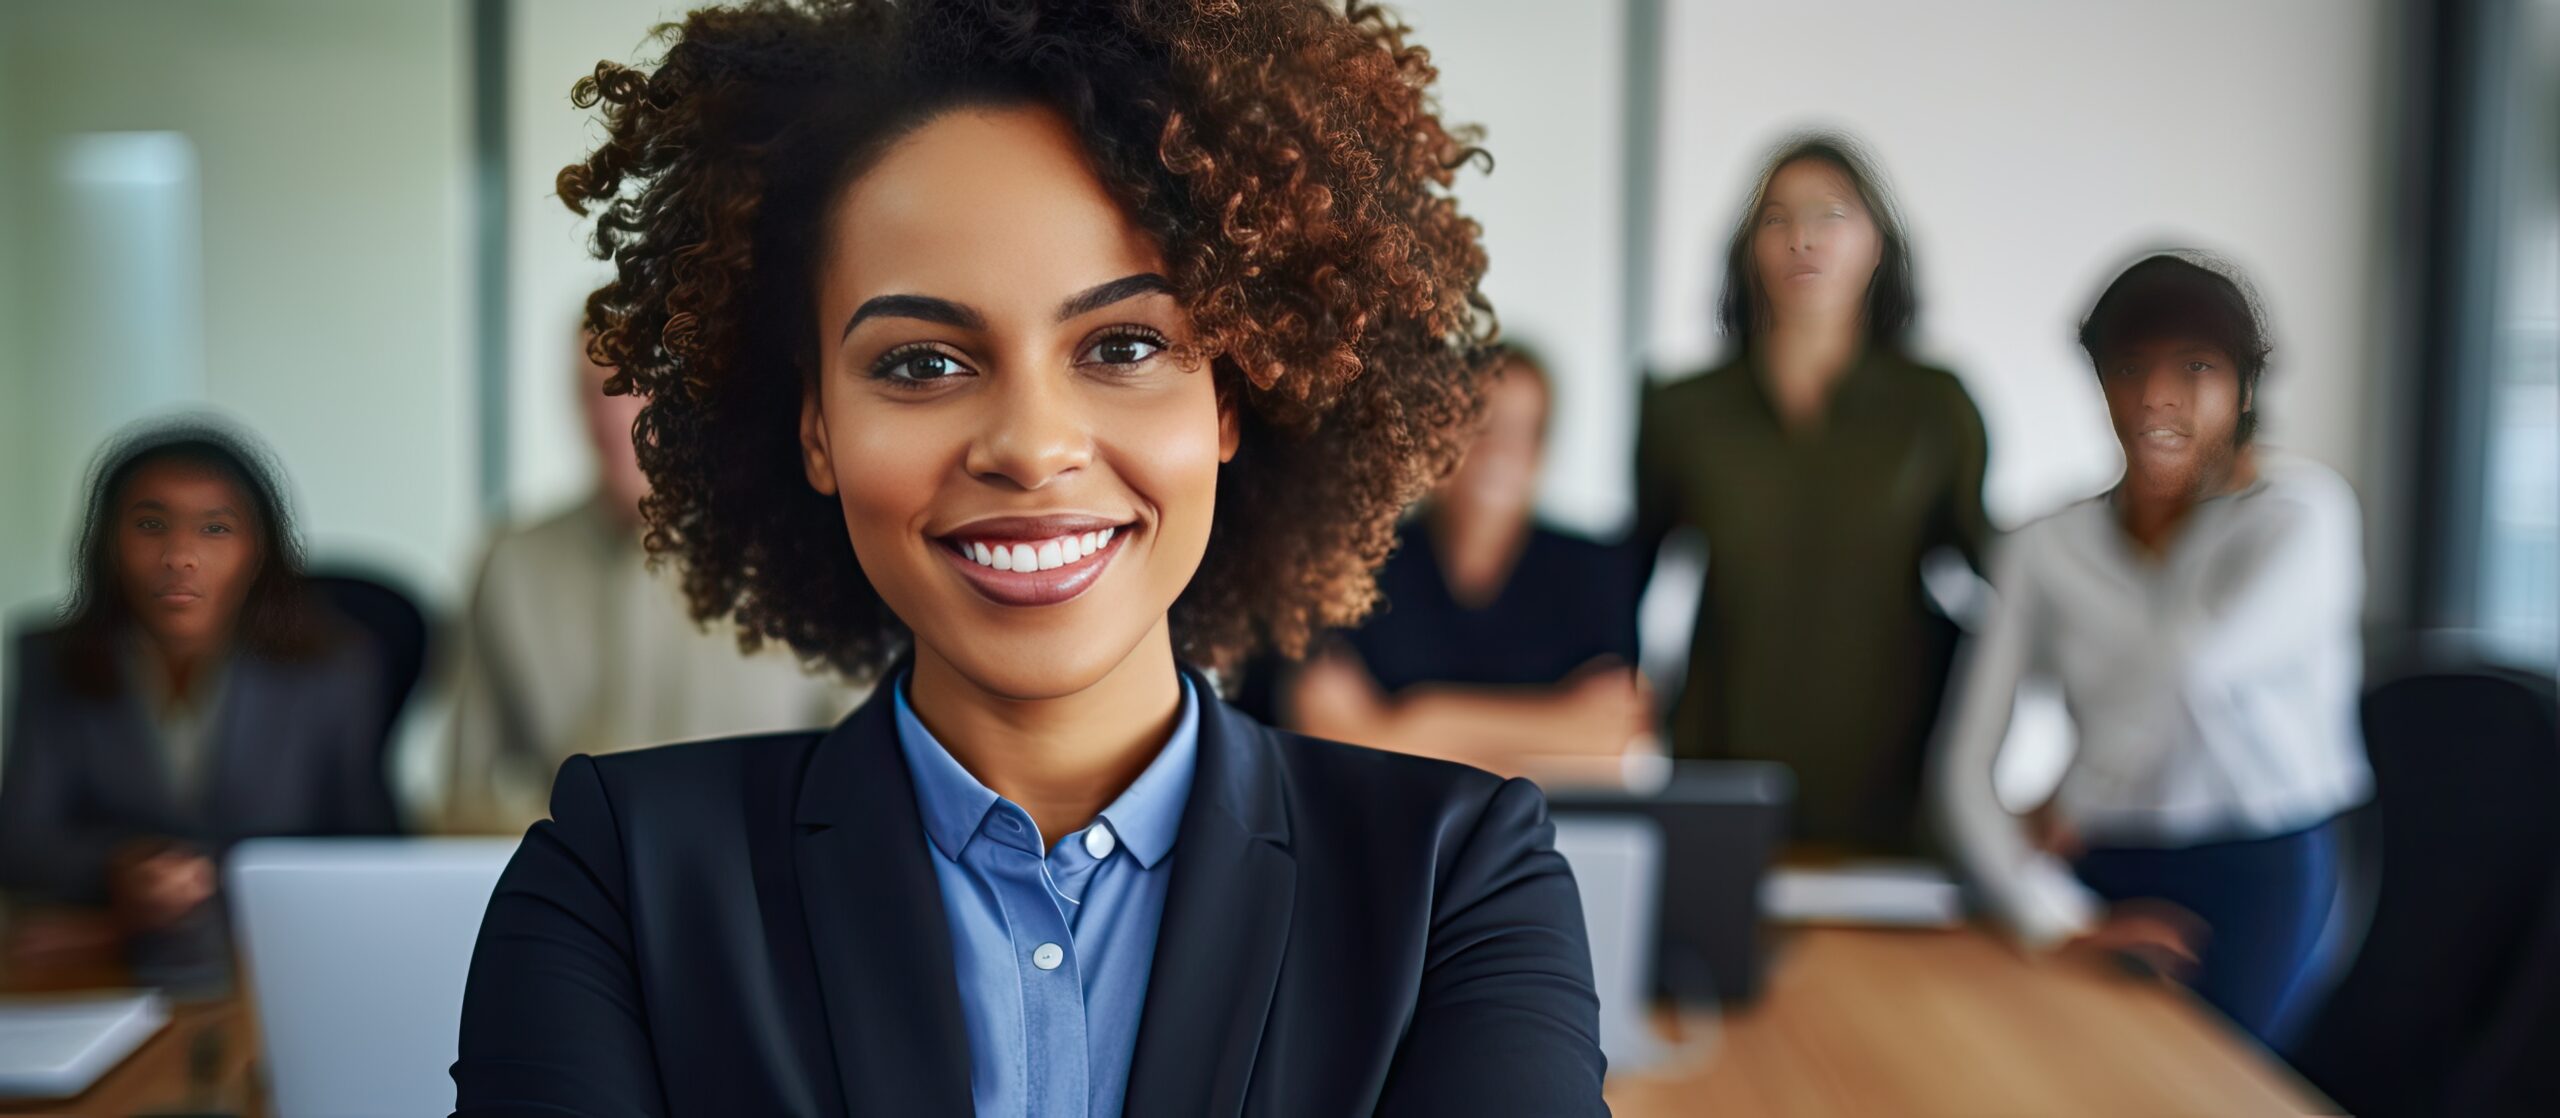 Confident African American woman on office desk with colleagues